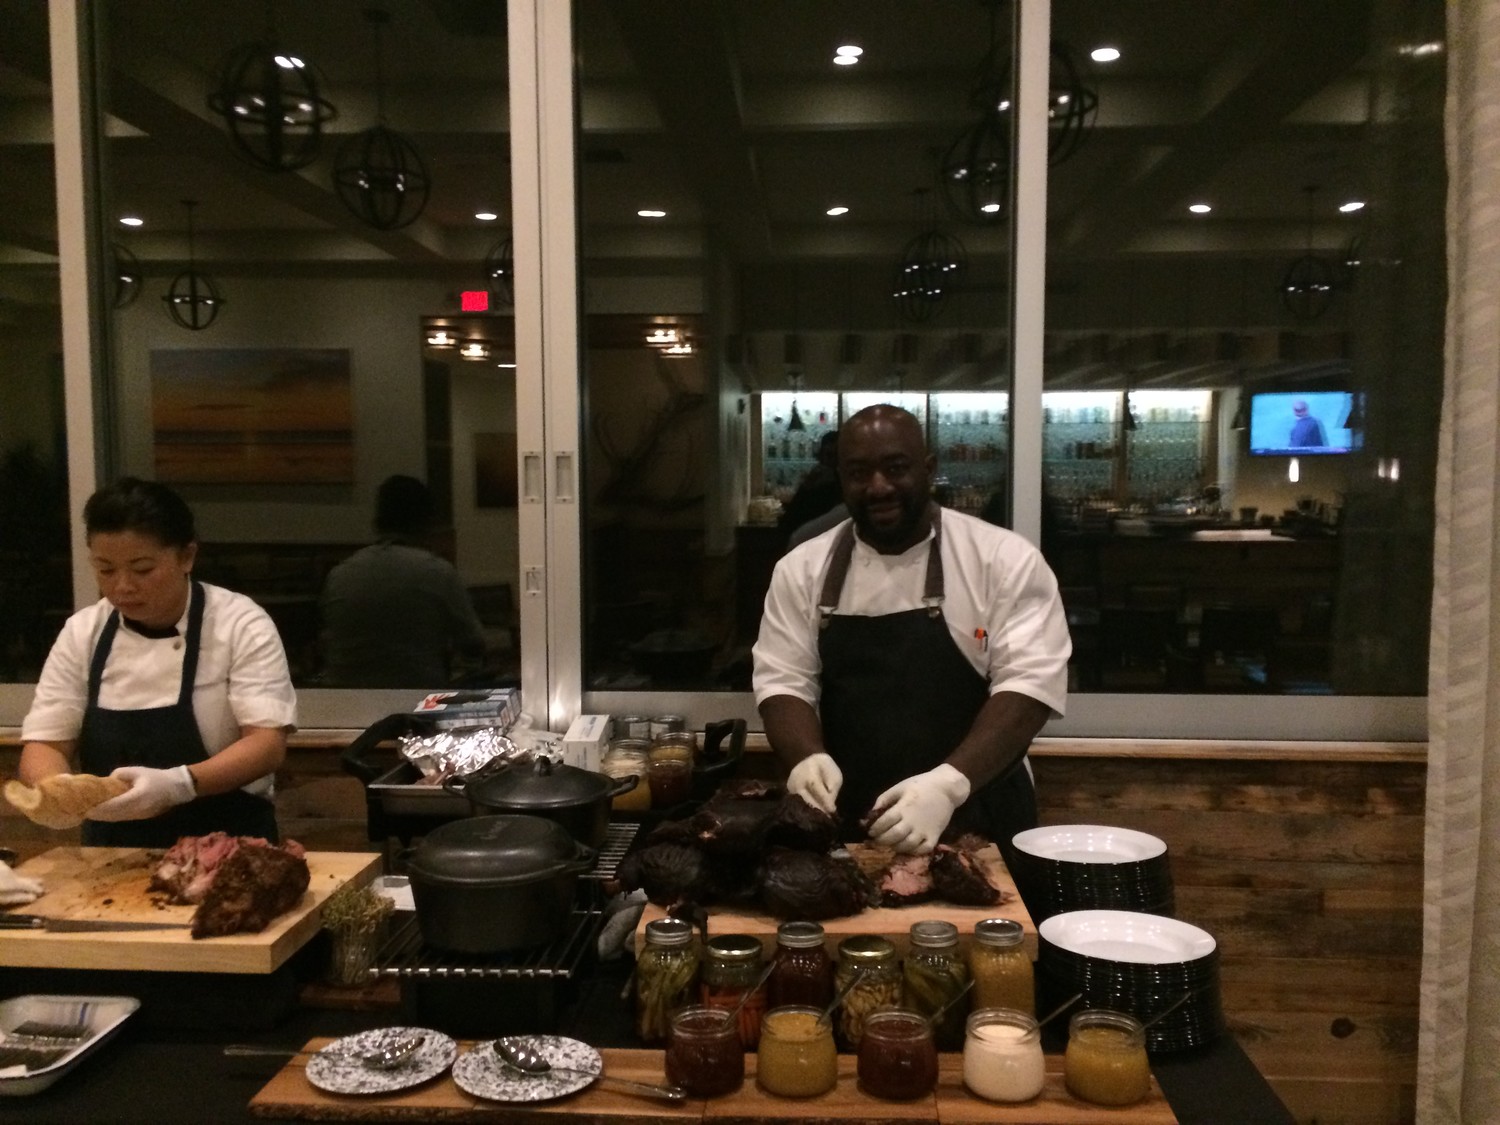 Chef Gilbert prepares a pork dinner at the Southern Kitchen opening preview event.